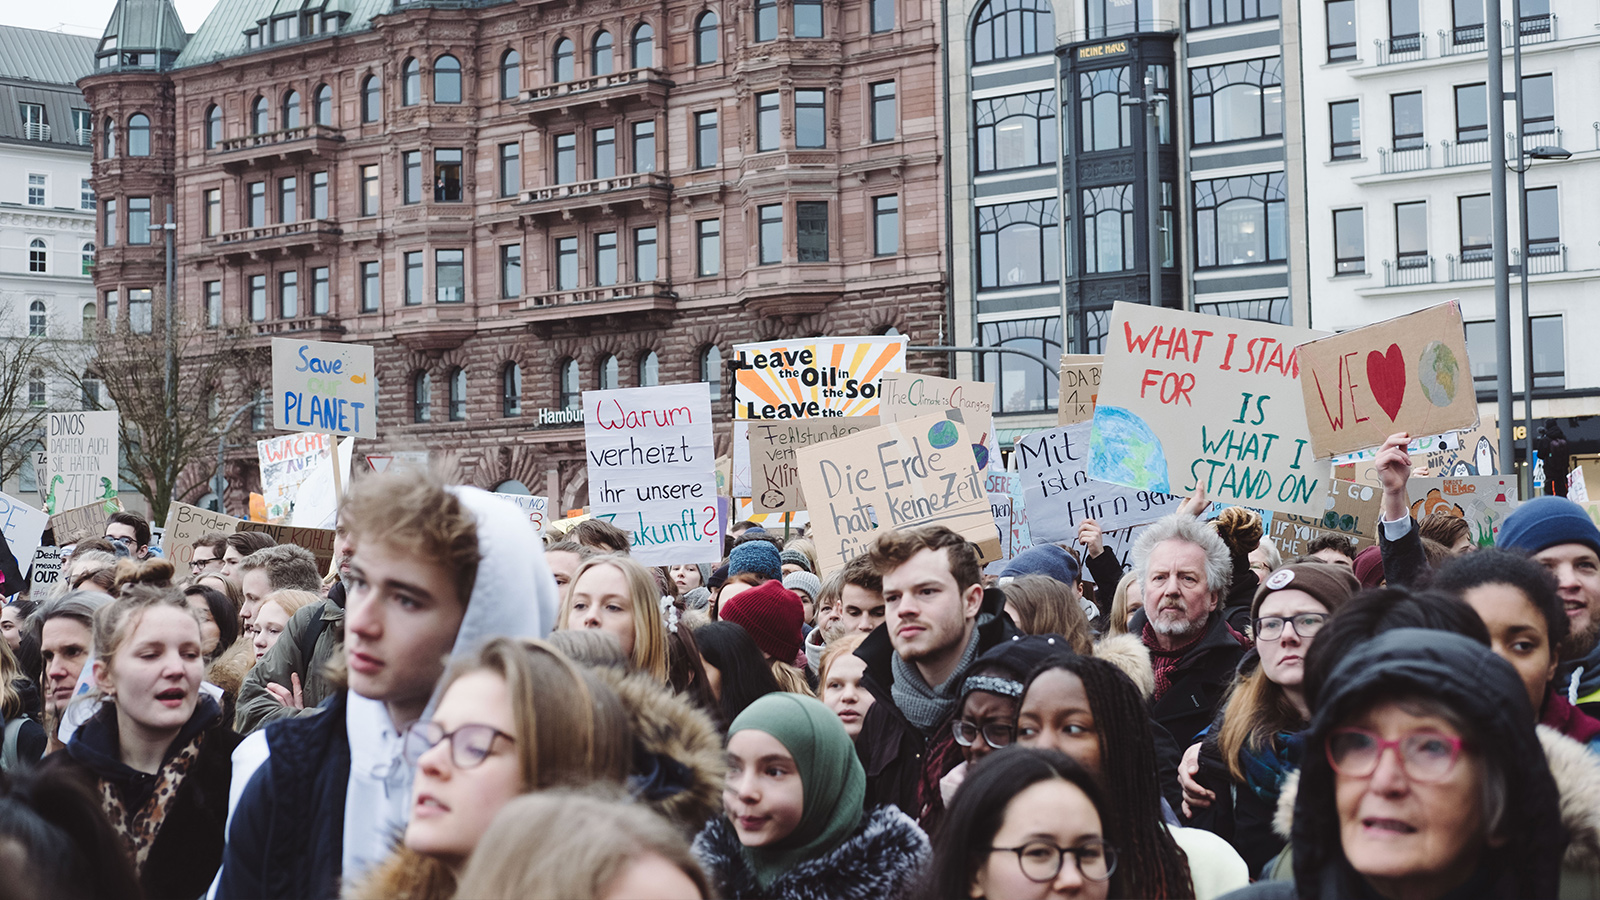 ecosia-joins-climate-strike-march-fridays-for-the-future-greta-thunberg-8